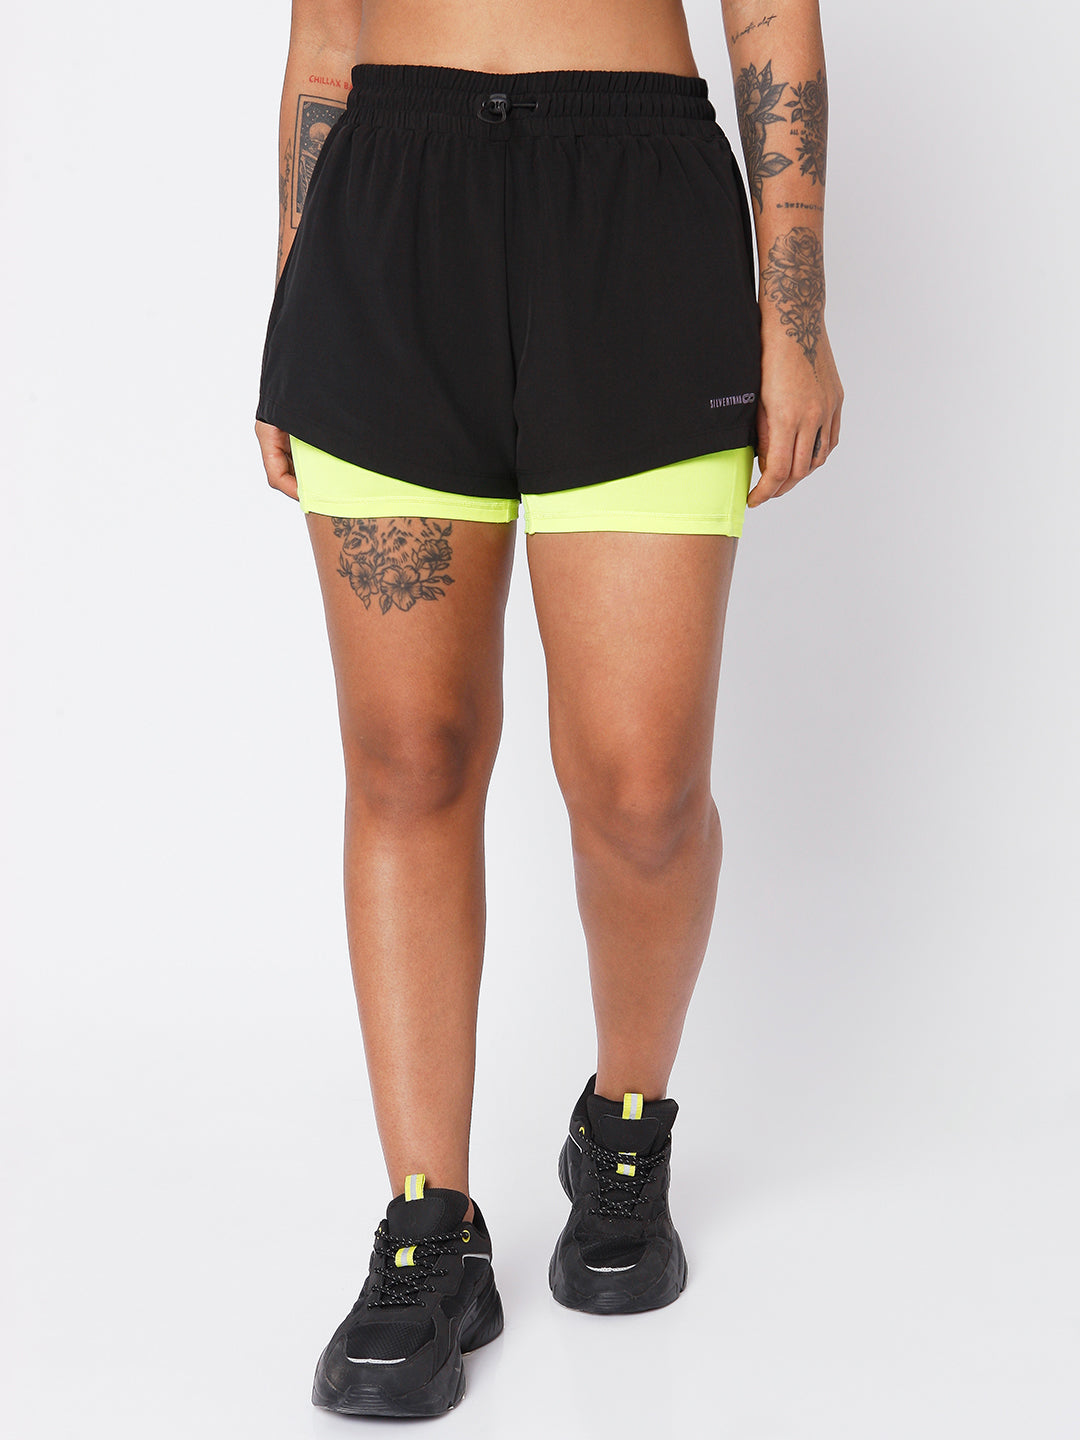 Racer Shorts Black Safety Yellow-Woven Shorts-Silvertraq-Black Safety Yellow-XS-Silvertraq